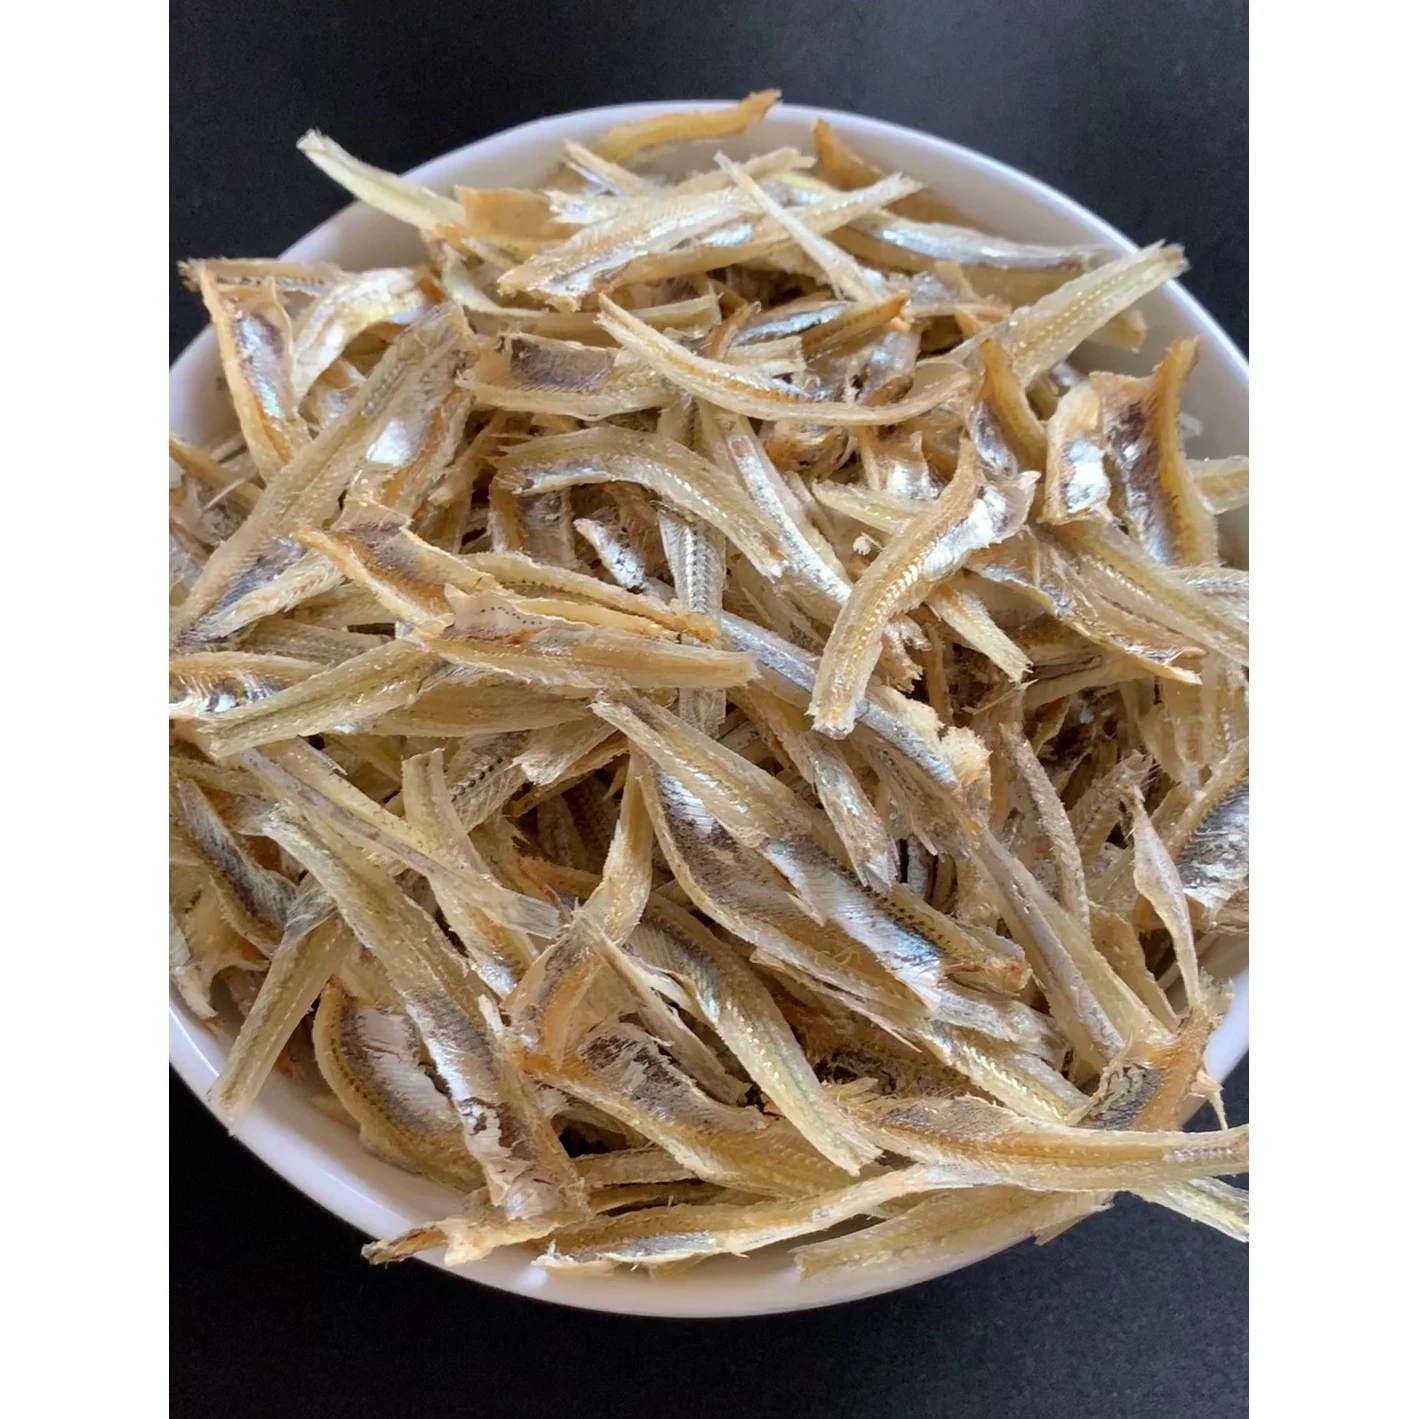 Premium Quality Dried Anchovy in Fillet Freshly Caught and Sun Dried